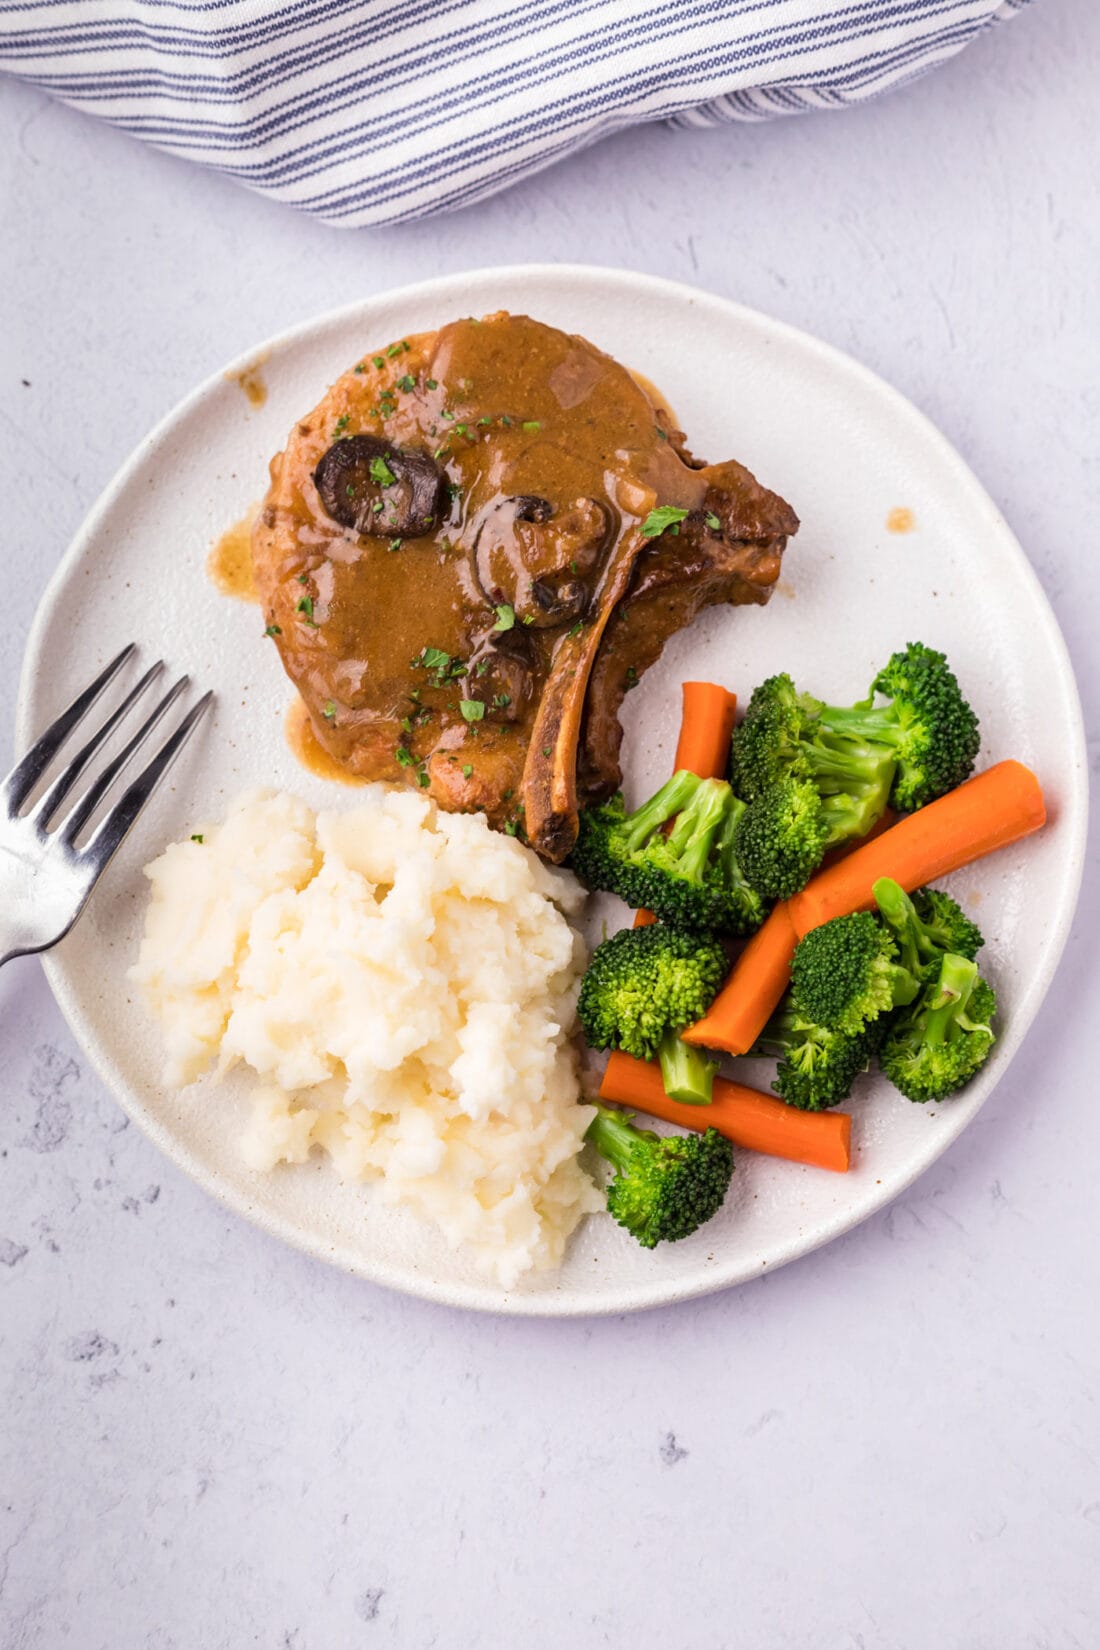 Crockpot Pork Chop served on a plate with mashed potatoes and mixed vegetables